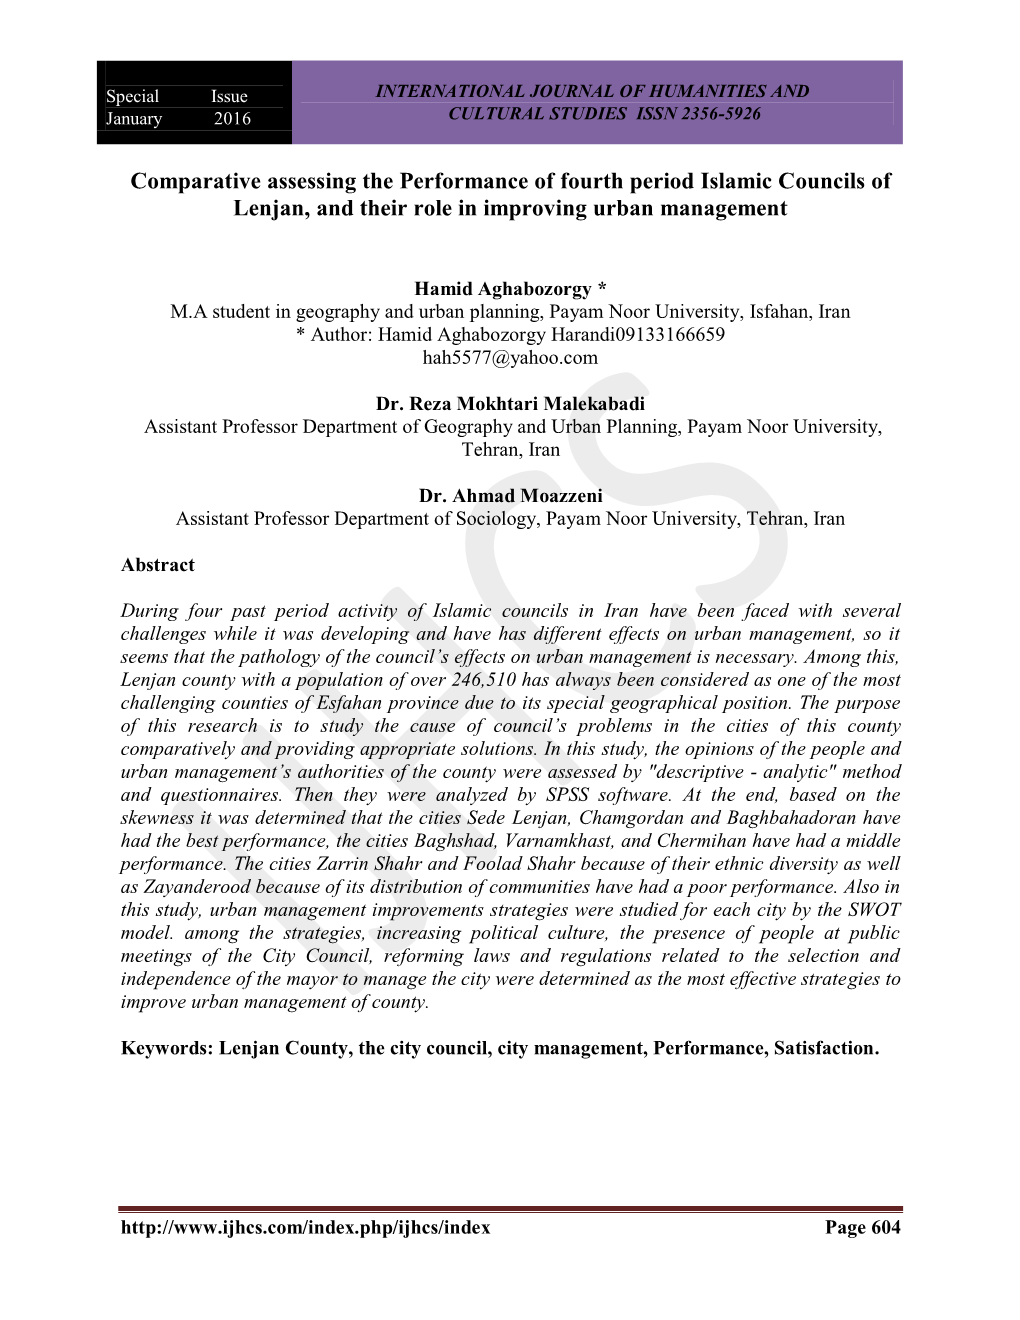 Comparative Assessing the Performance of Fourth Period Islamic Councils of Lenjan, and Their Role in Improving Urban Management